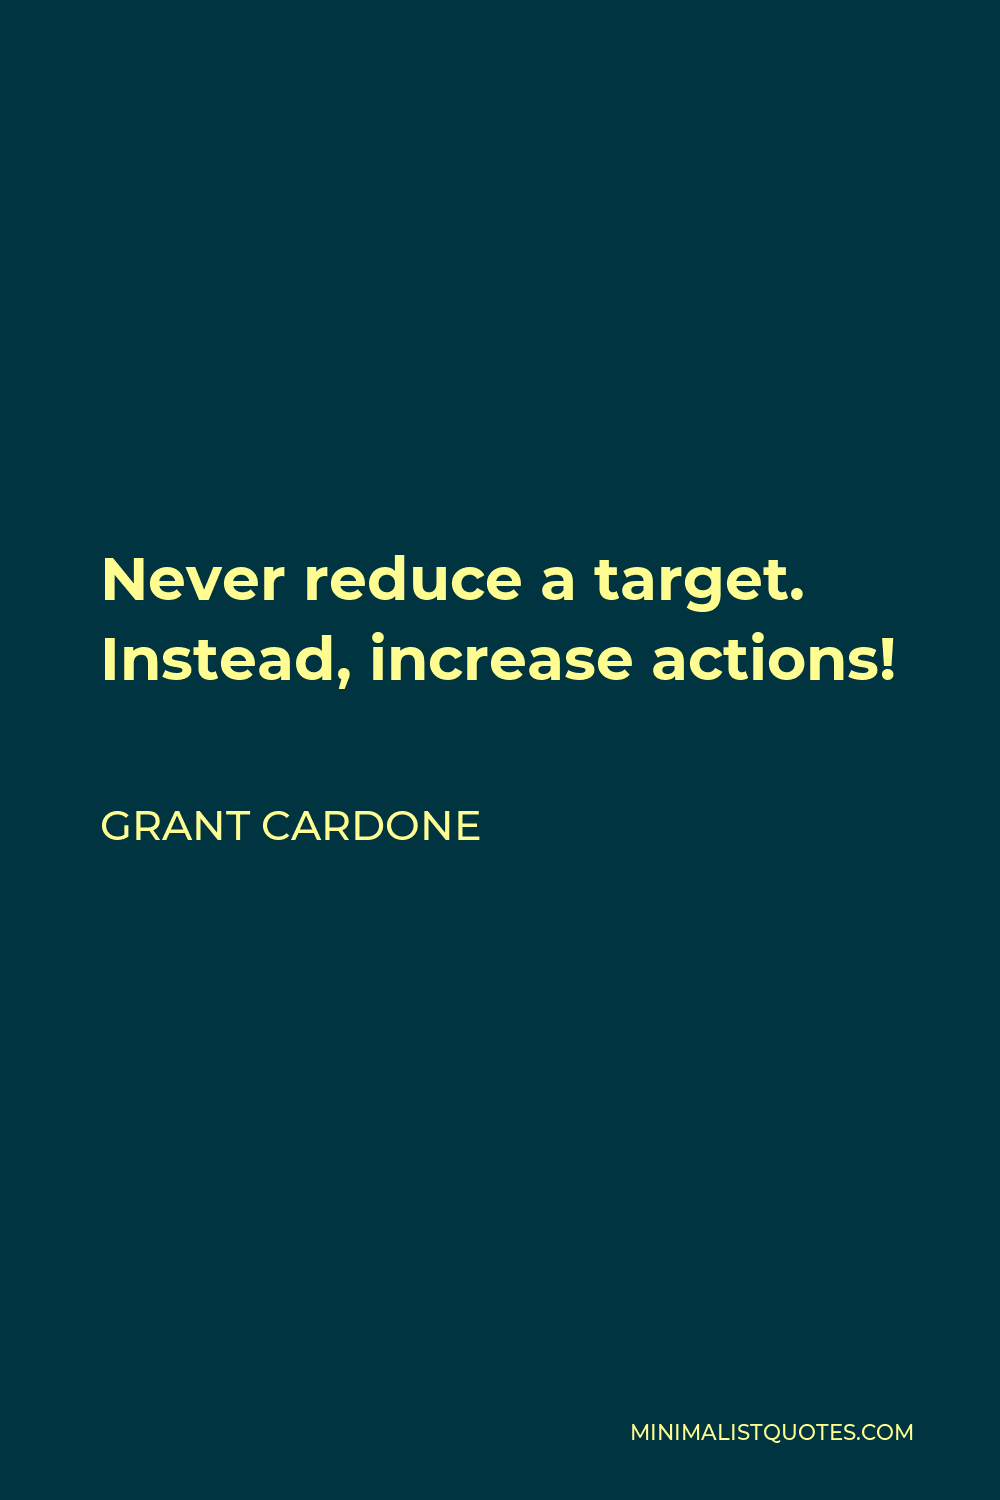 Grant Cardone Quote - Never reduce a target. Instead, increase actions. When you start rethinking your targets, making up excuses, and letting yourself off the hook, you are giving up on your dreams!